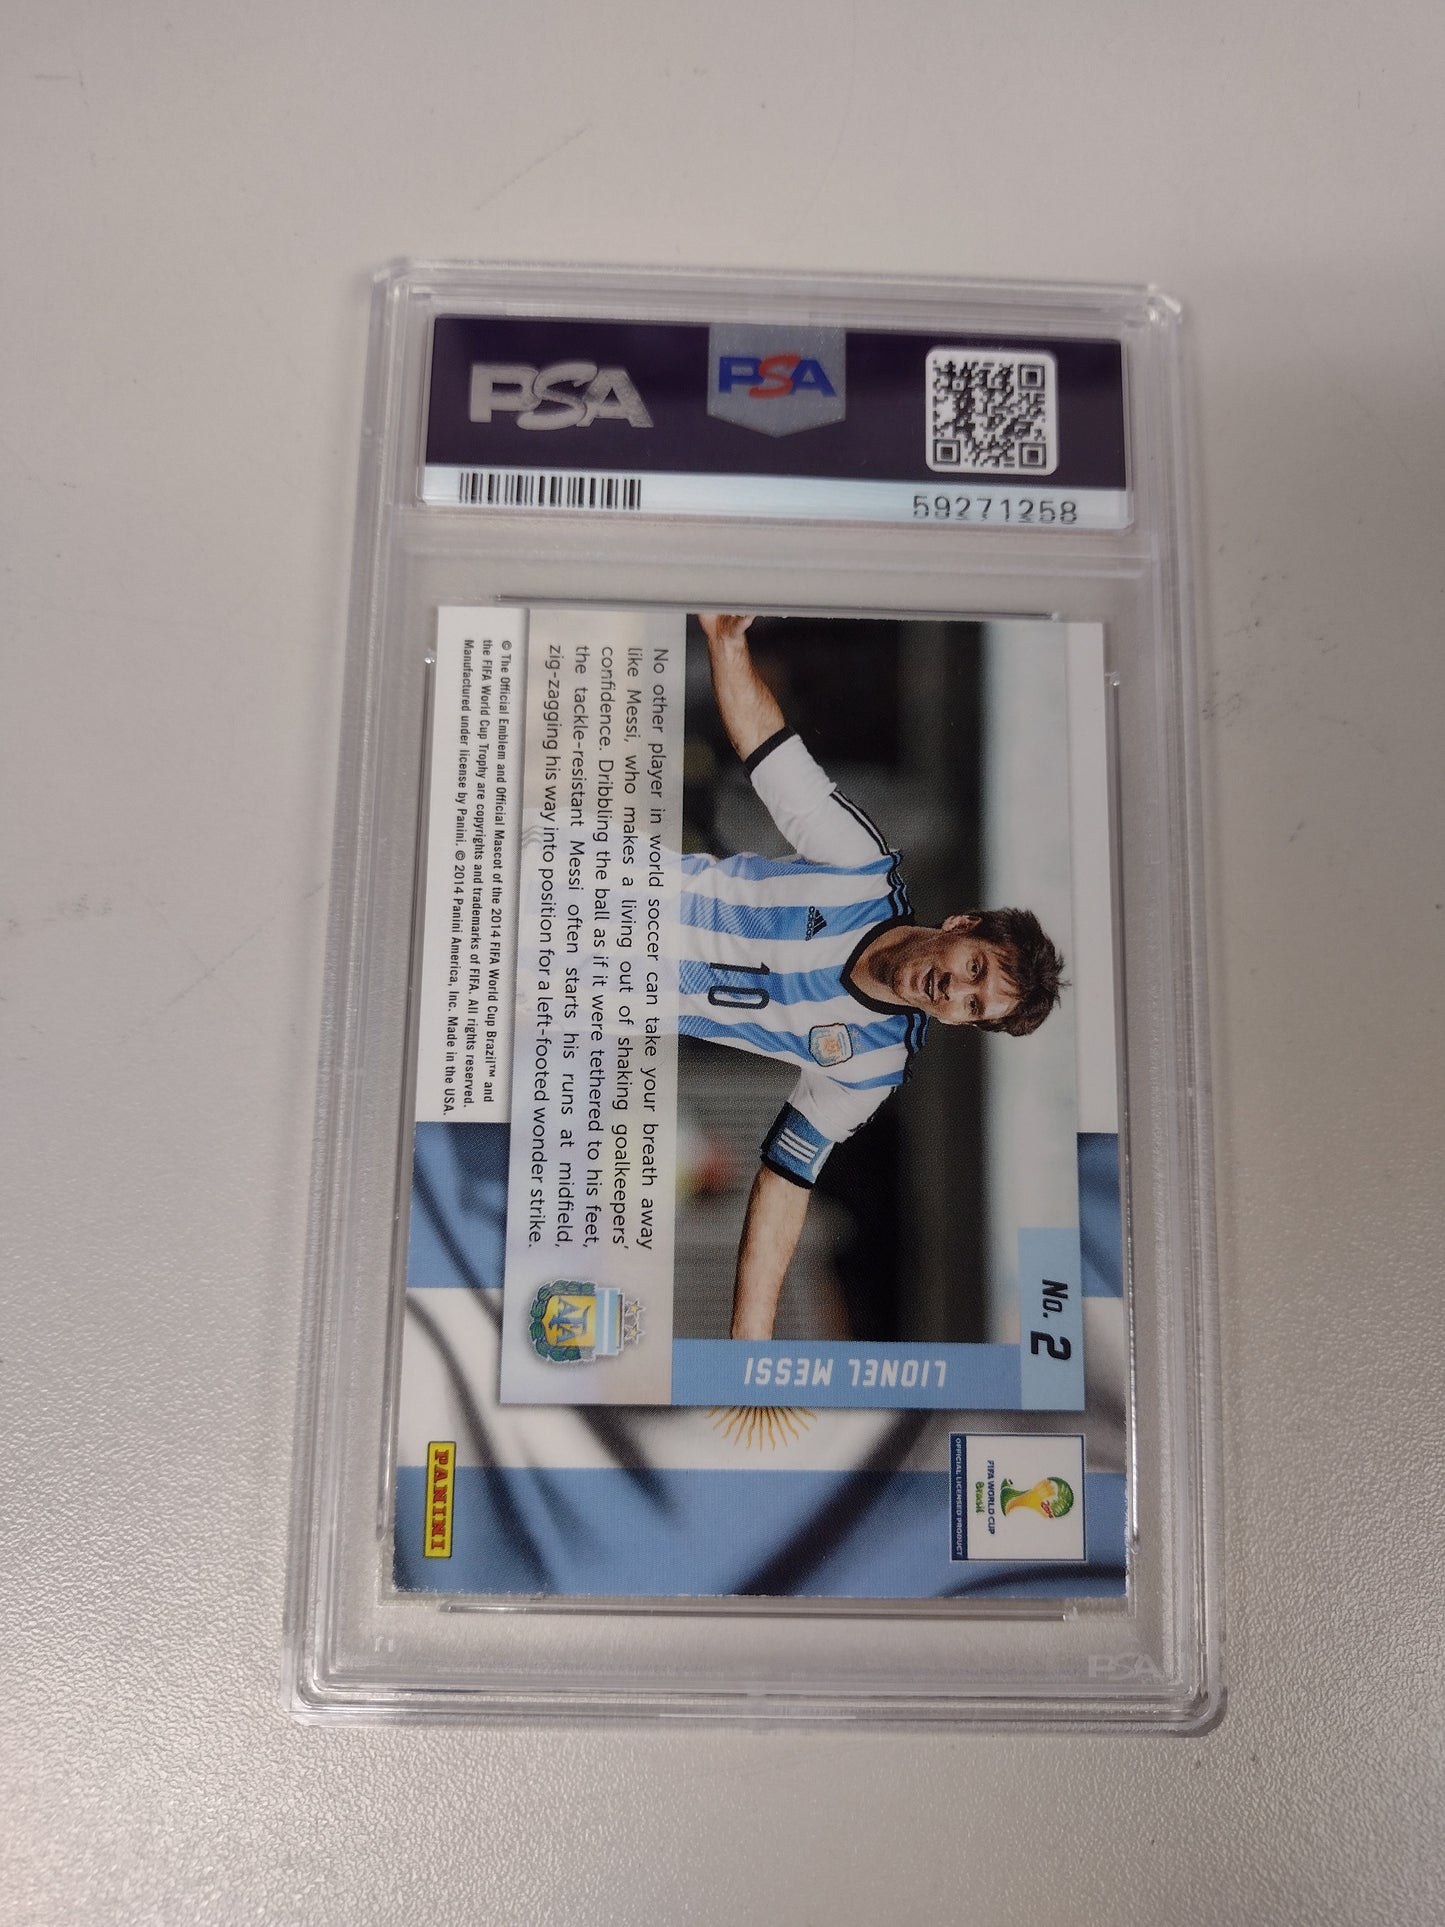 2014 Panini Prizm Lionel Messi World Cup Net Finders PSA 8